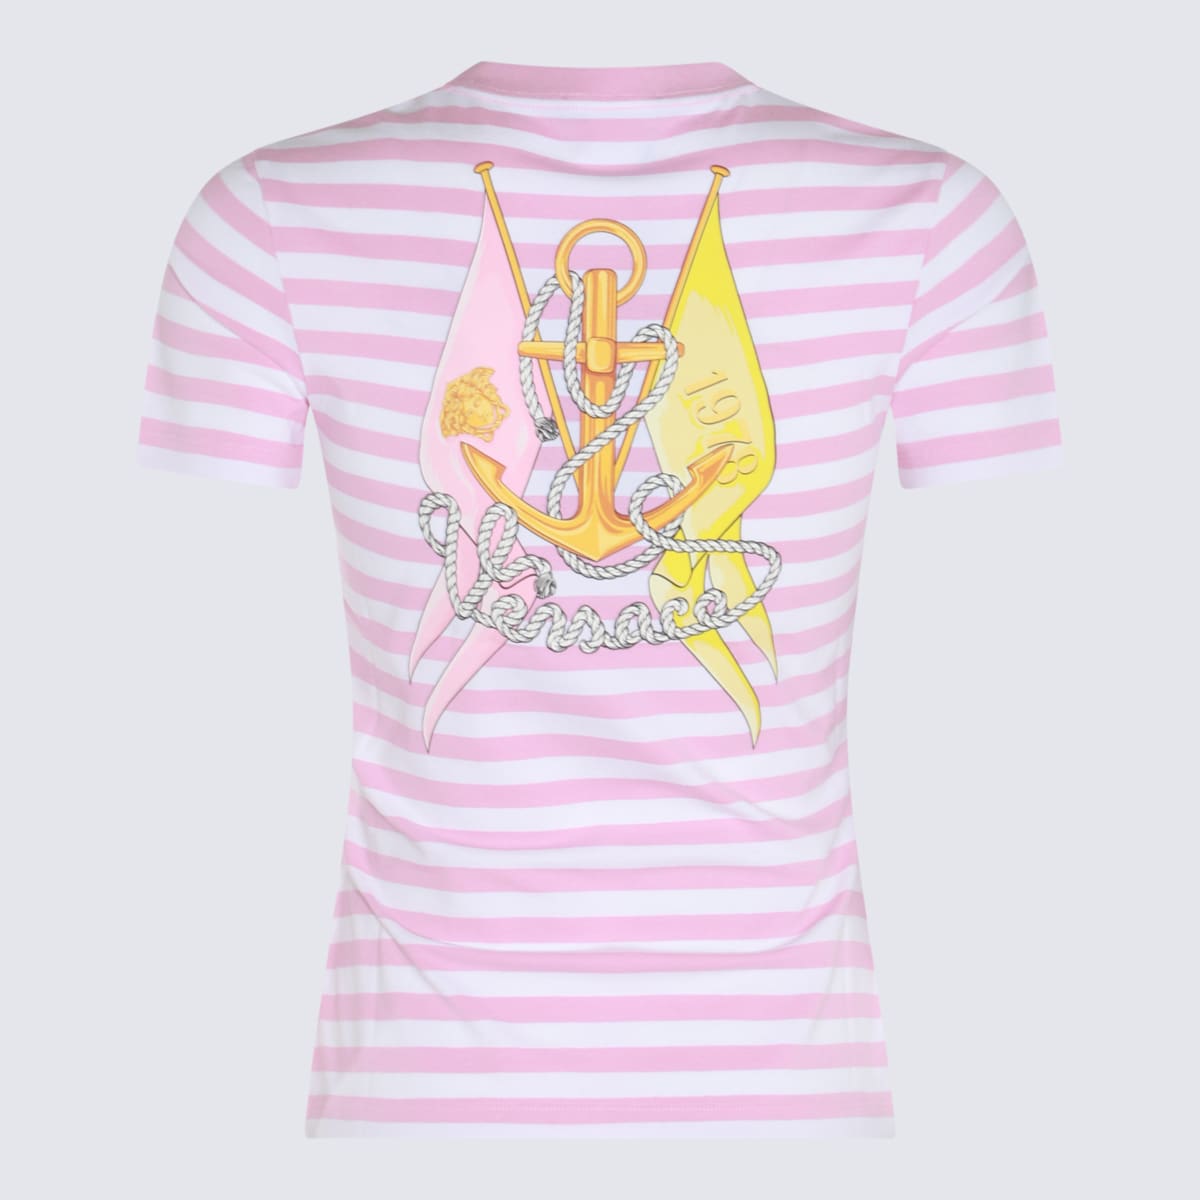 Shop Versace Pink And White Cotton Blend T-shirt In White+pale Pink+multicolour